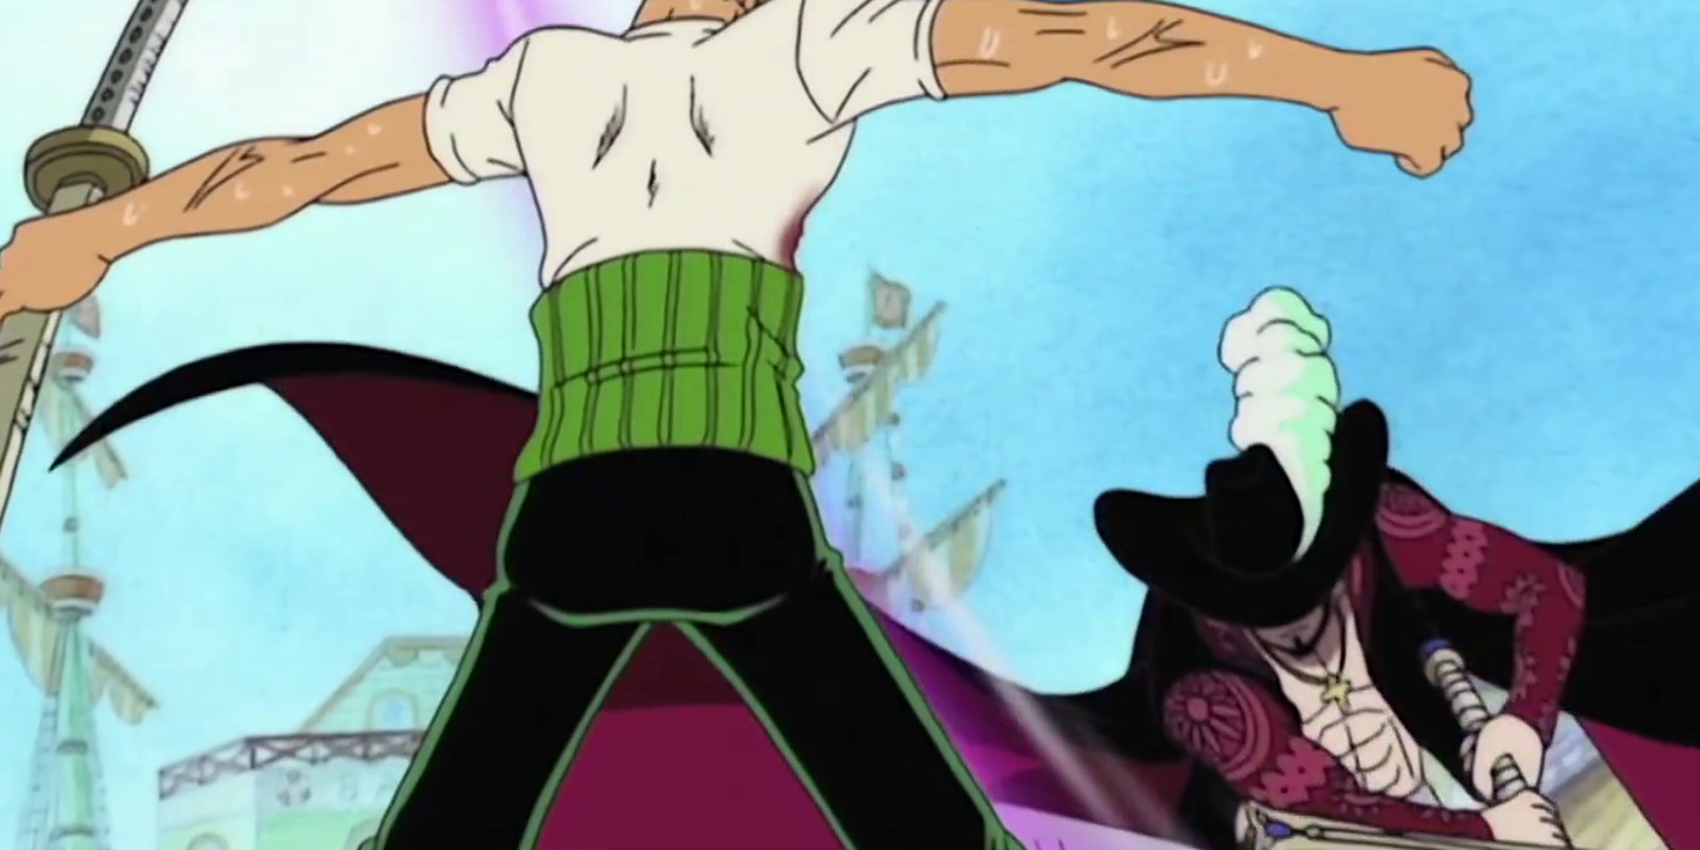 Zoro clashes with Mihawk in One Piece